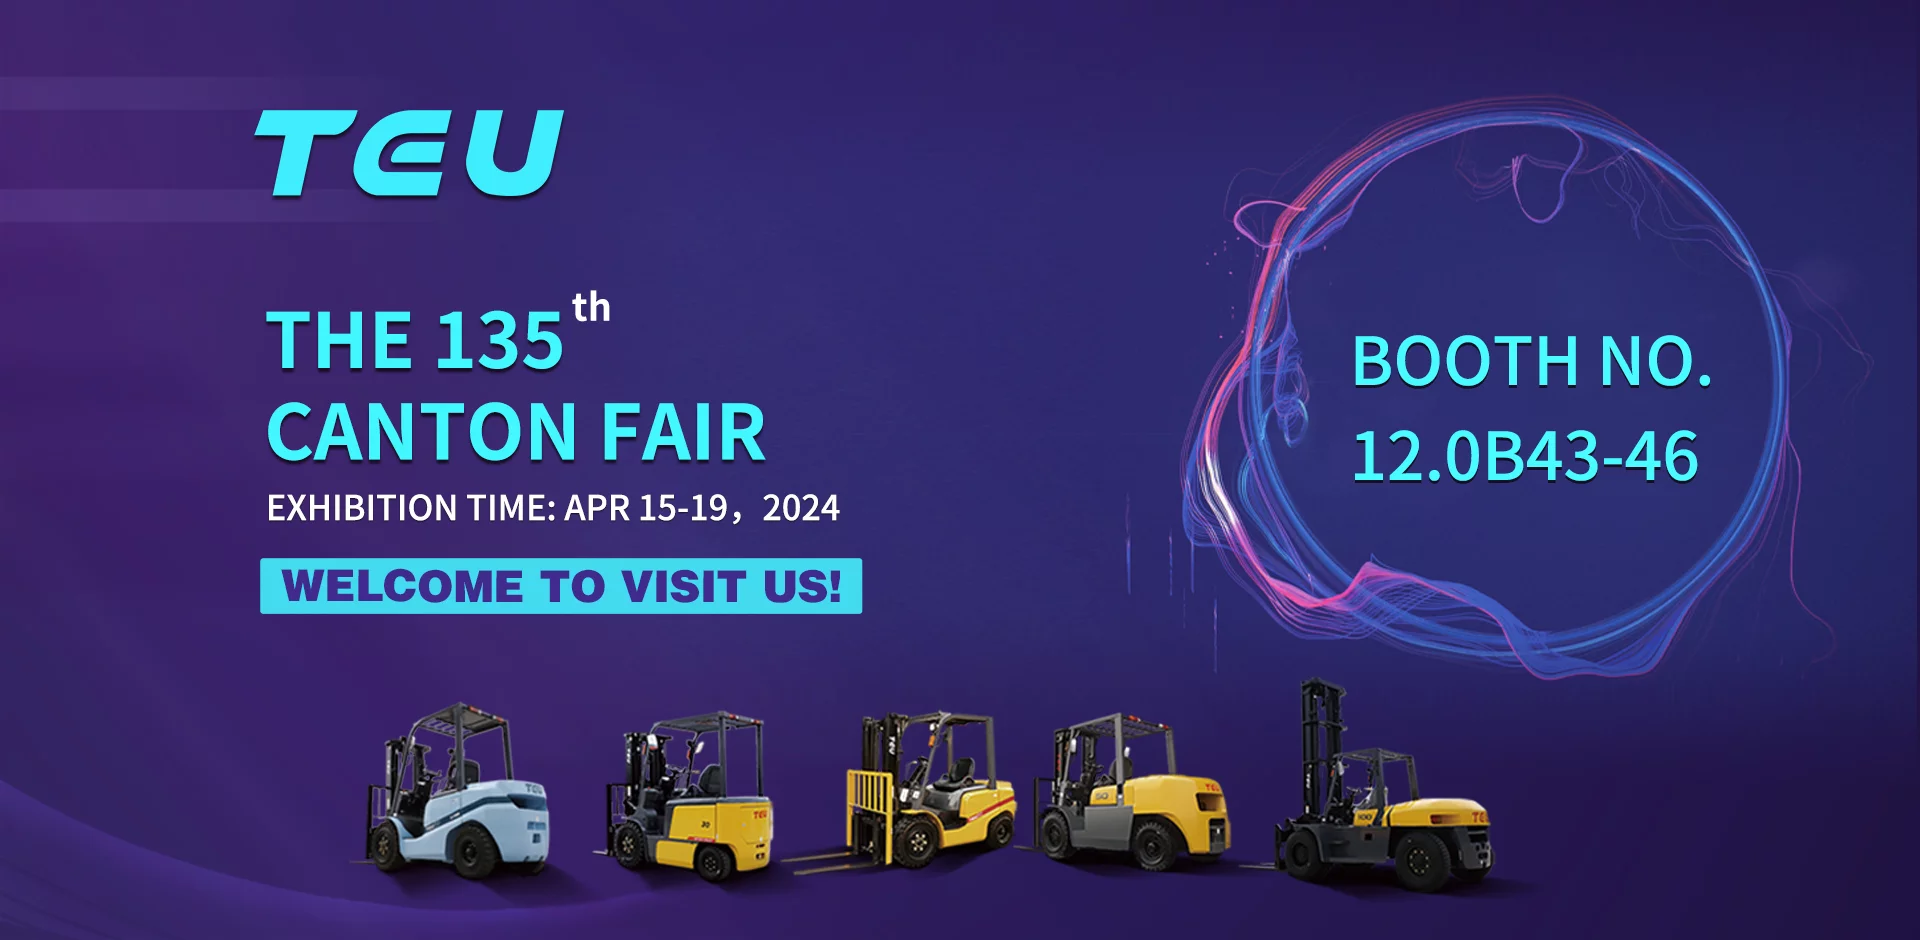 TEU Forklifts: Global Excellence in Material Handling